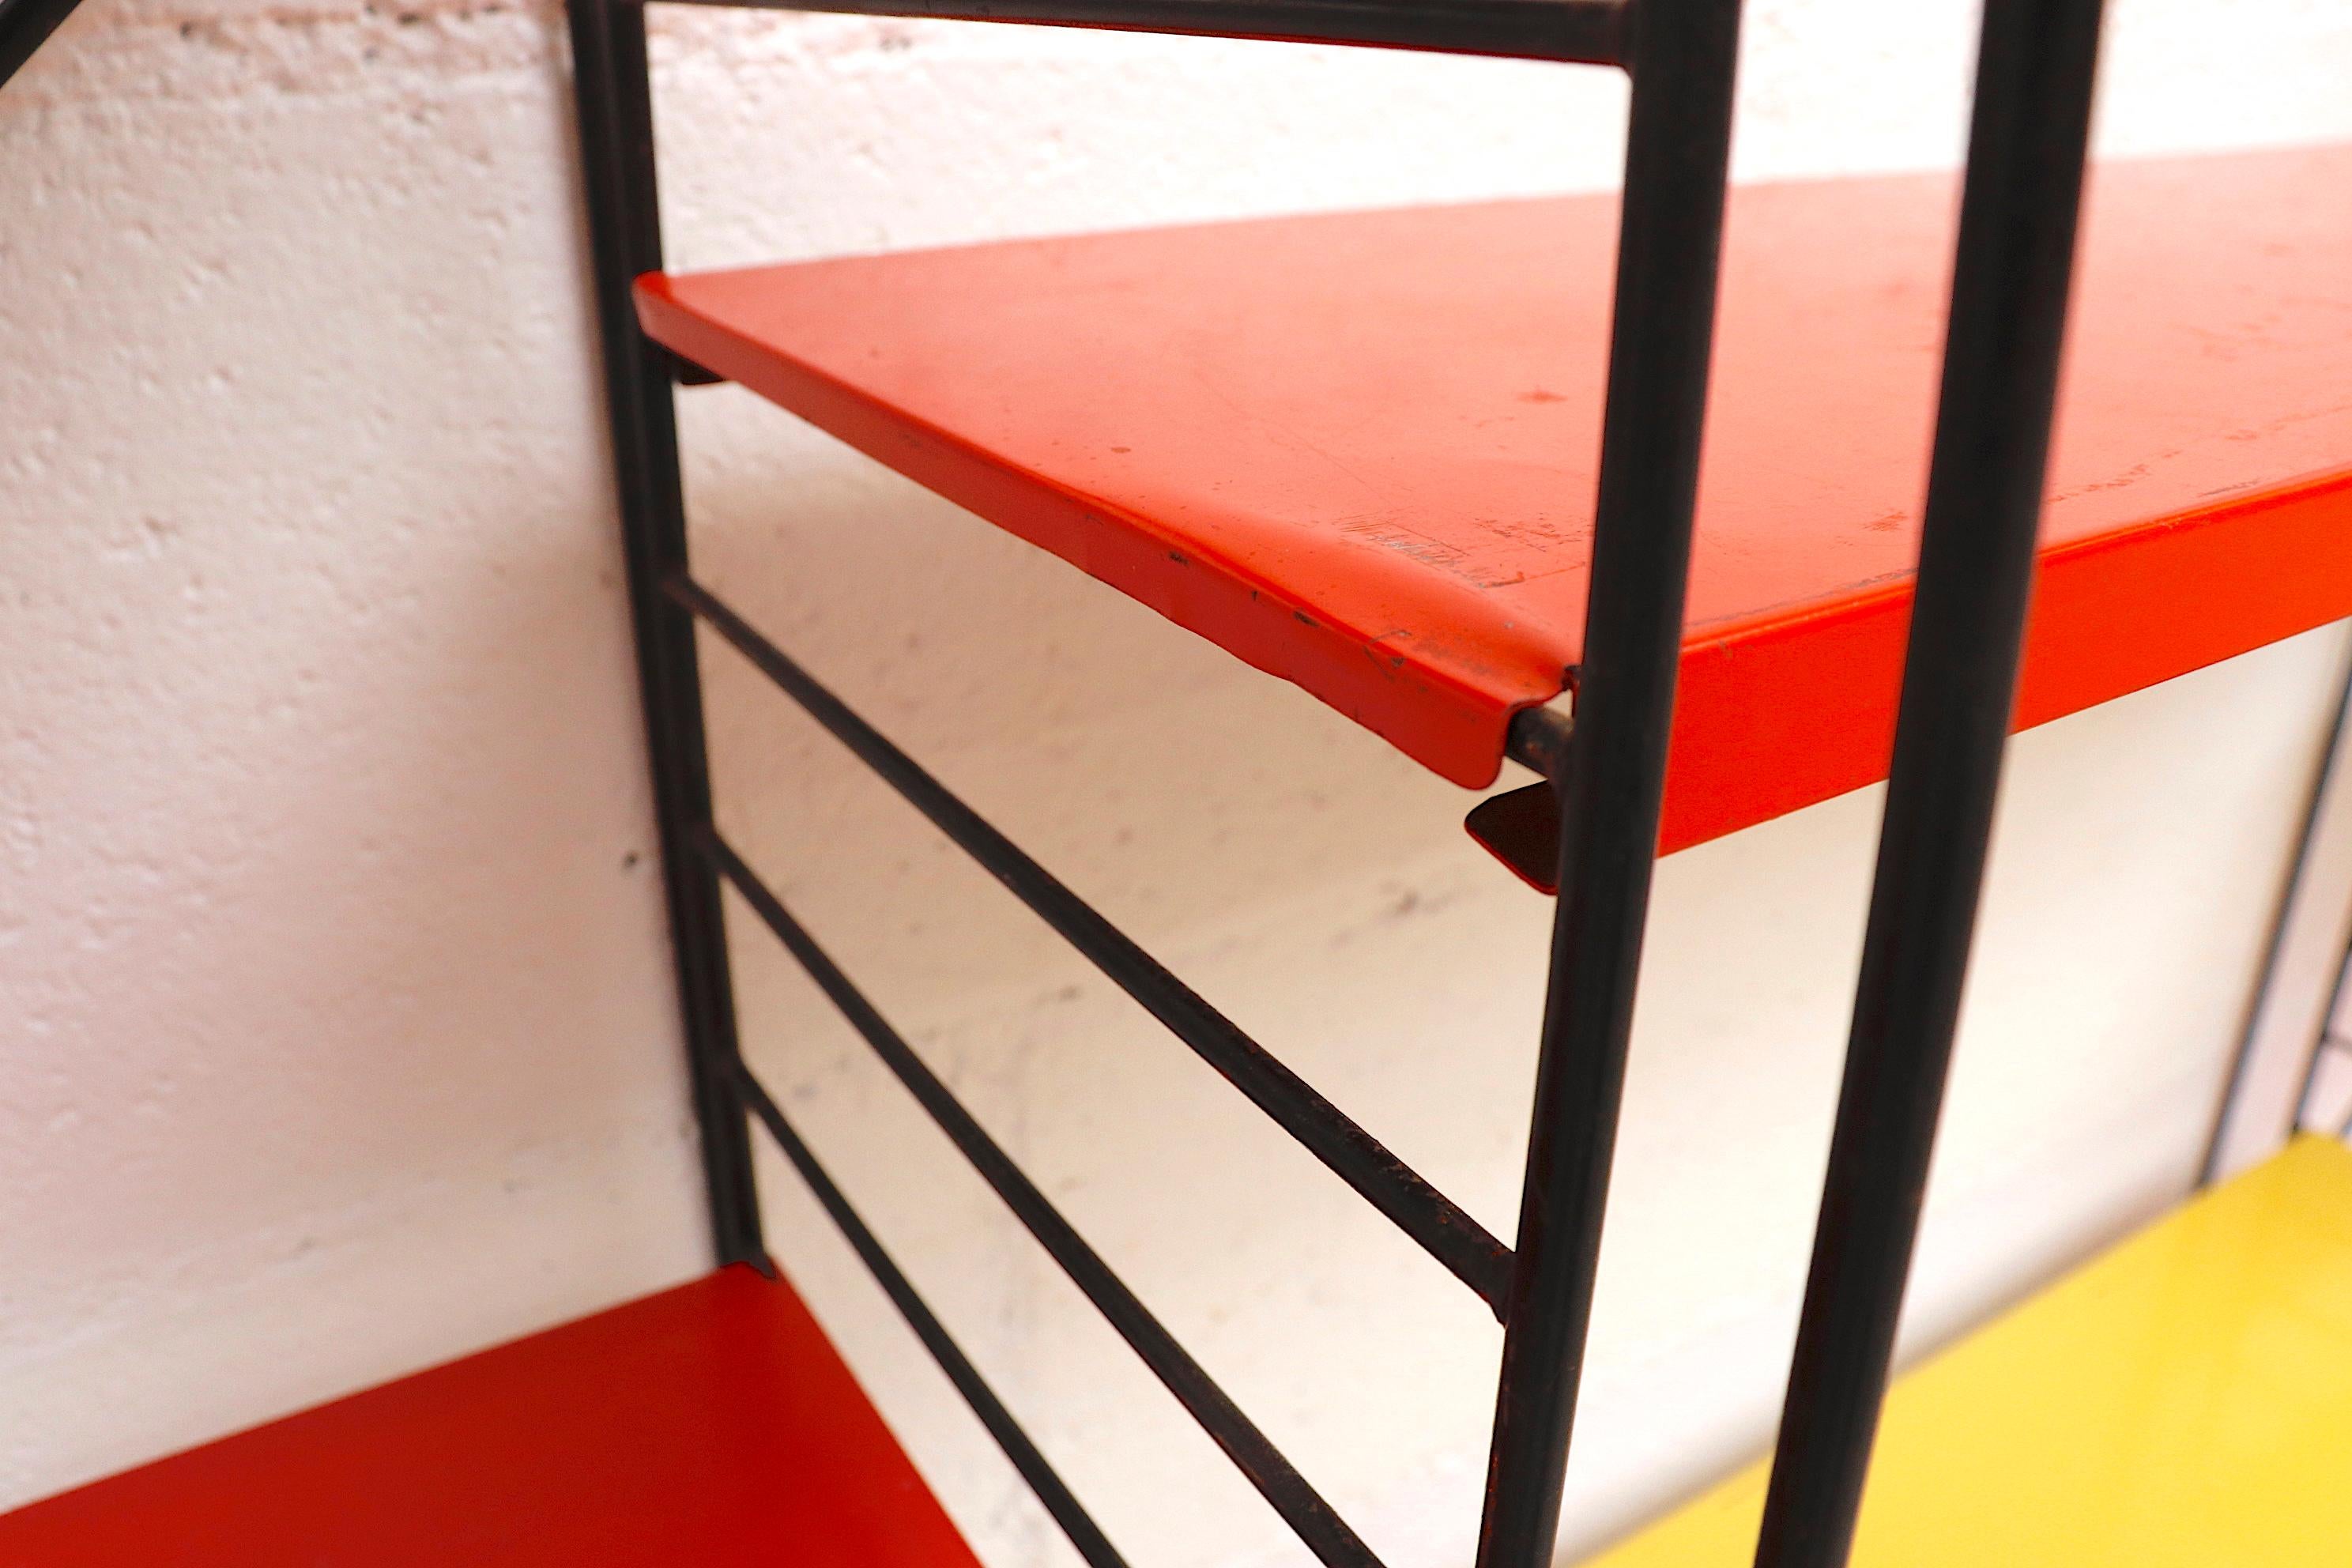 Mid-20th Century Tomado Industrial Three Section Standing Book Shelf by Jan Van Der Togt